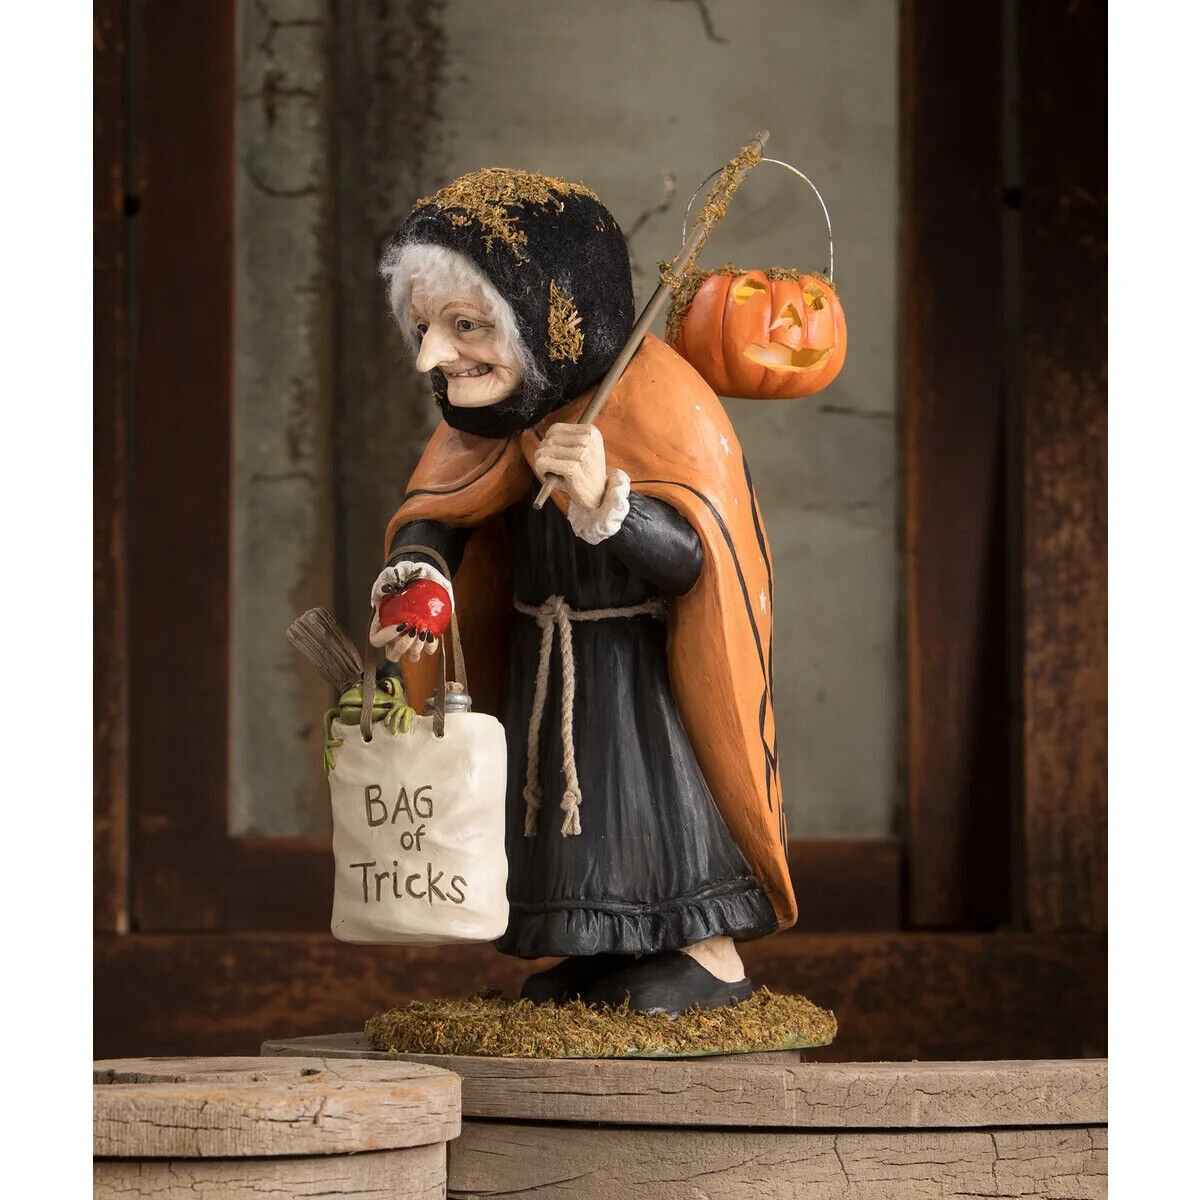 Bethany Lowe Halloween Just a Wee Bit Wicked Witch TD1198 - The Primitive Pineapple Collection